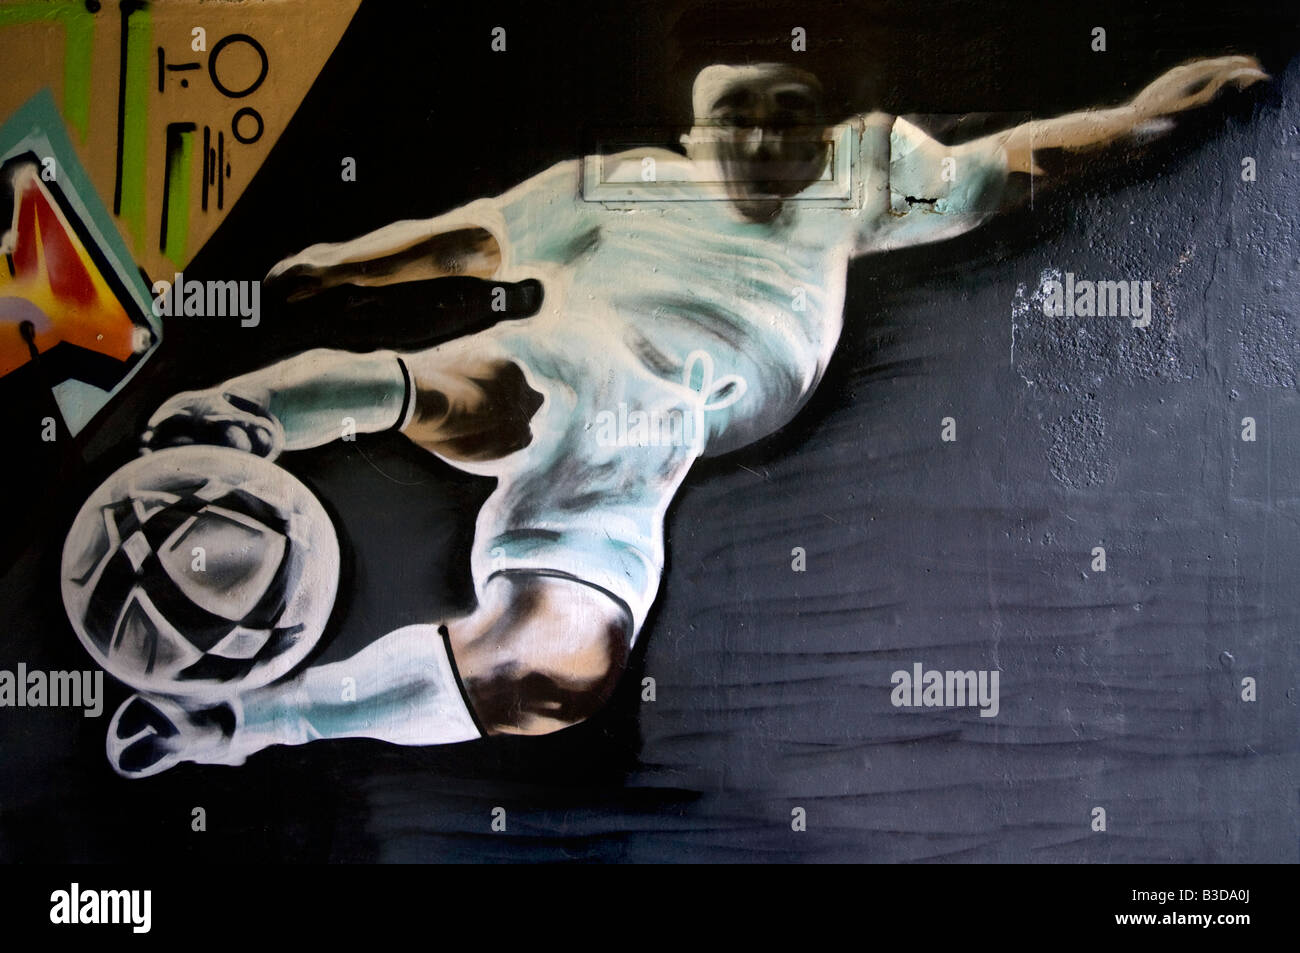 A graffiti image of a soccer player kicking a football painted on a wall. Stock Photo